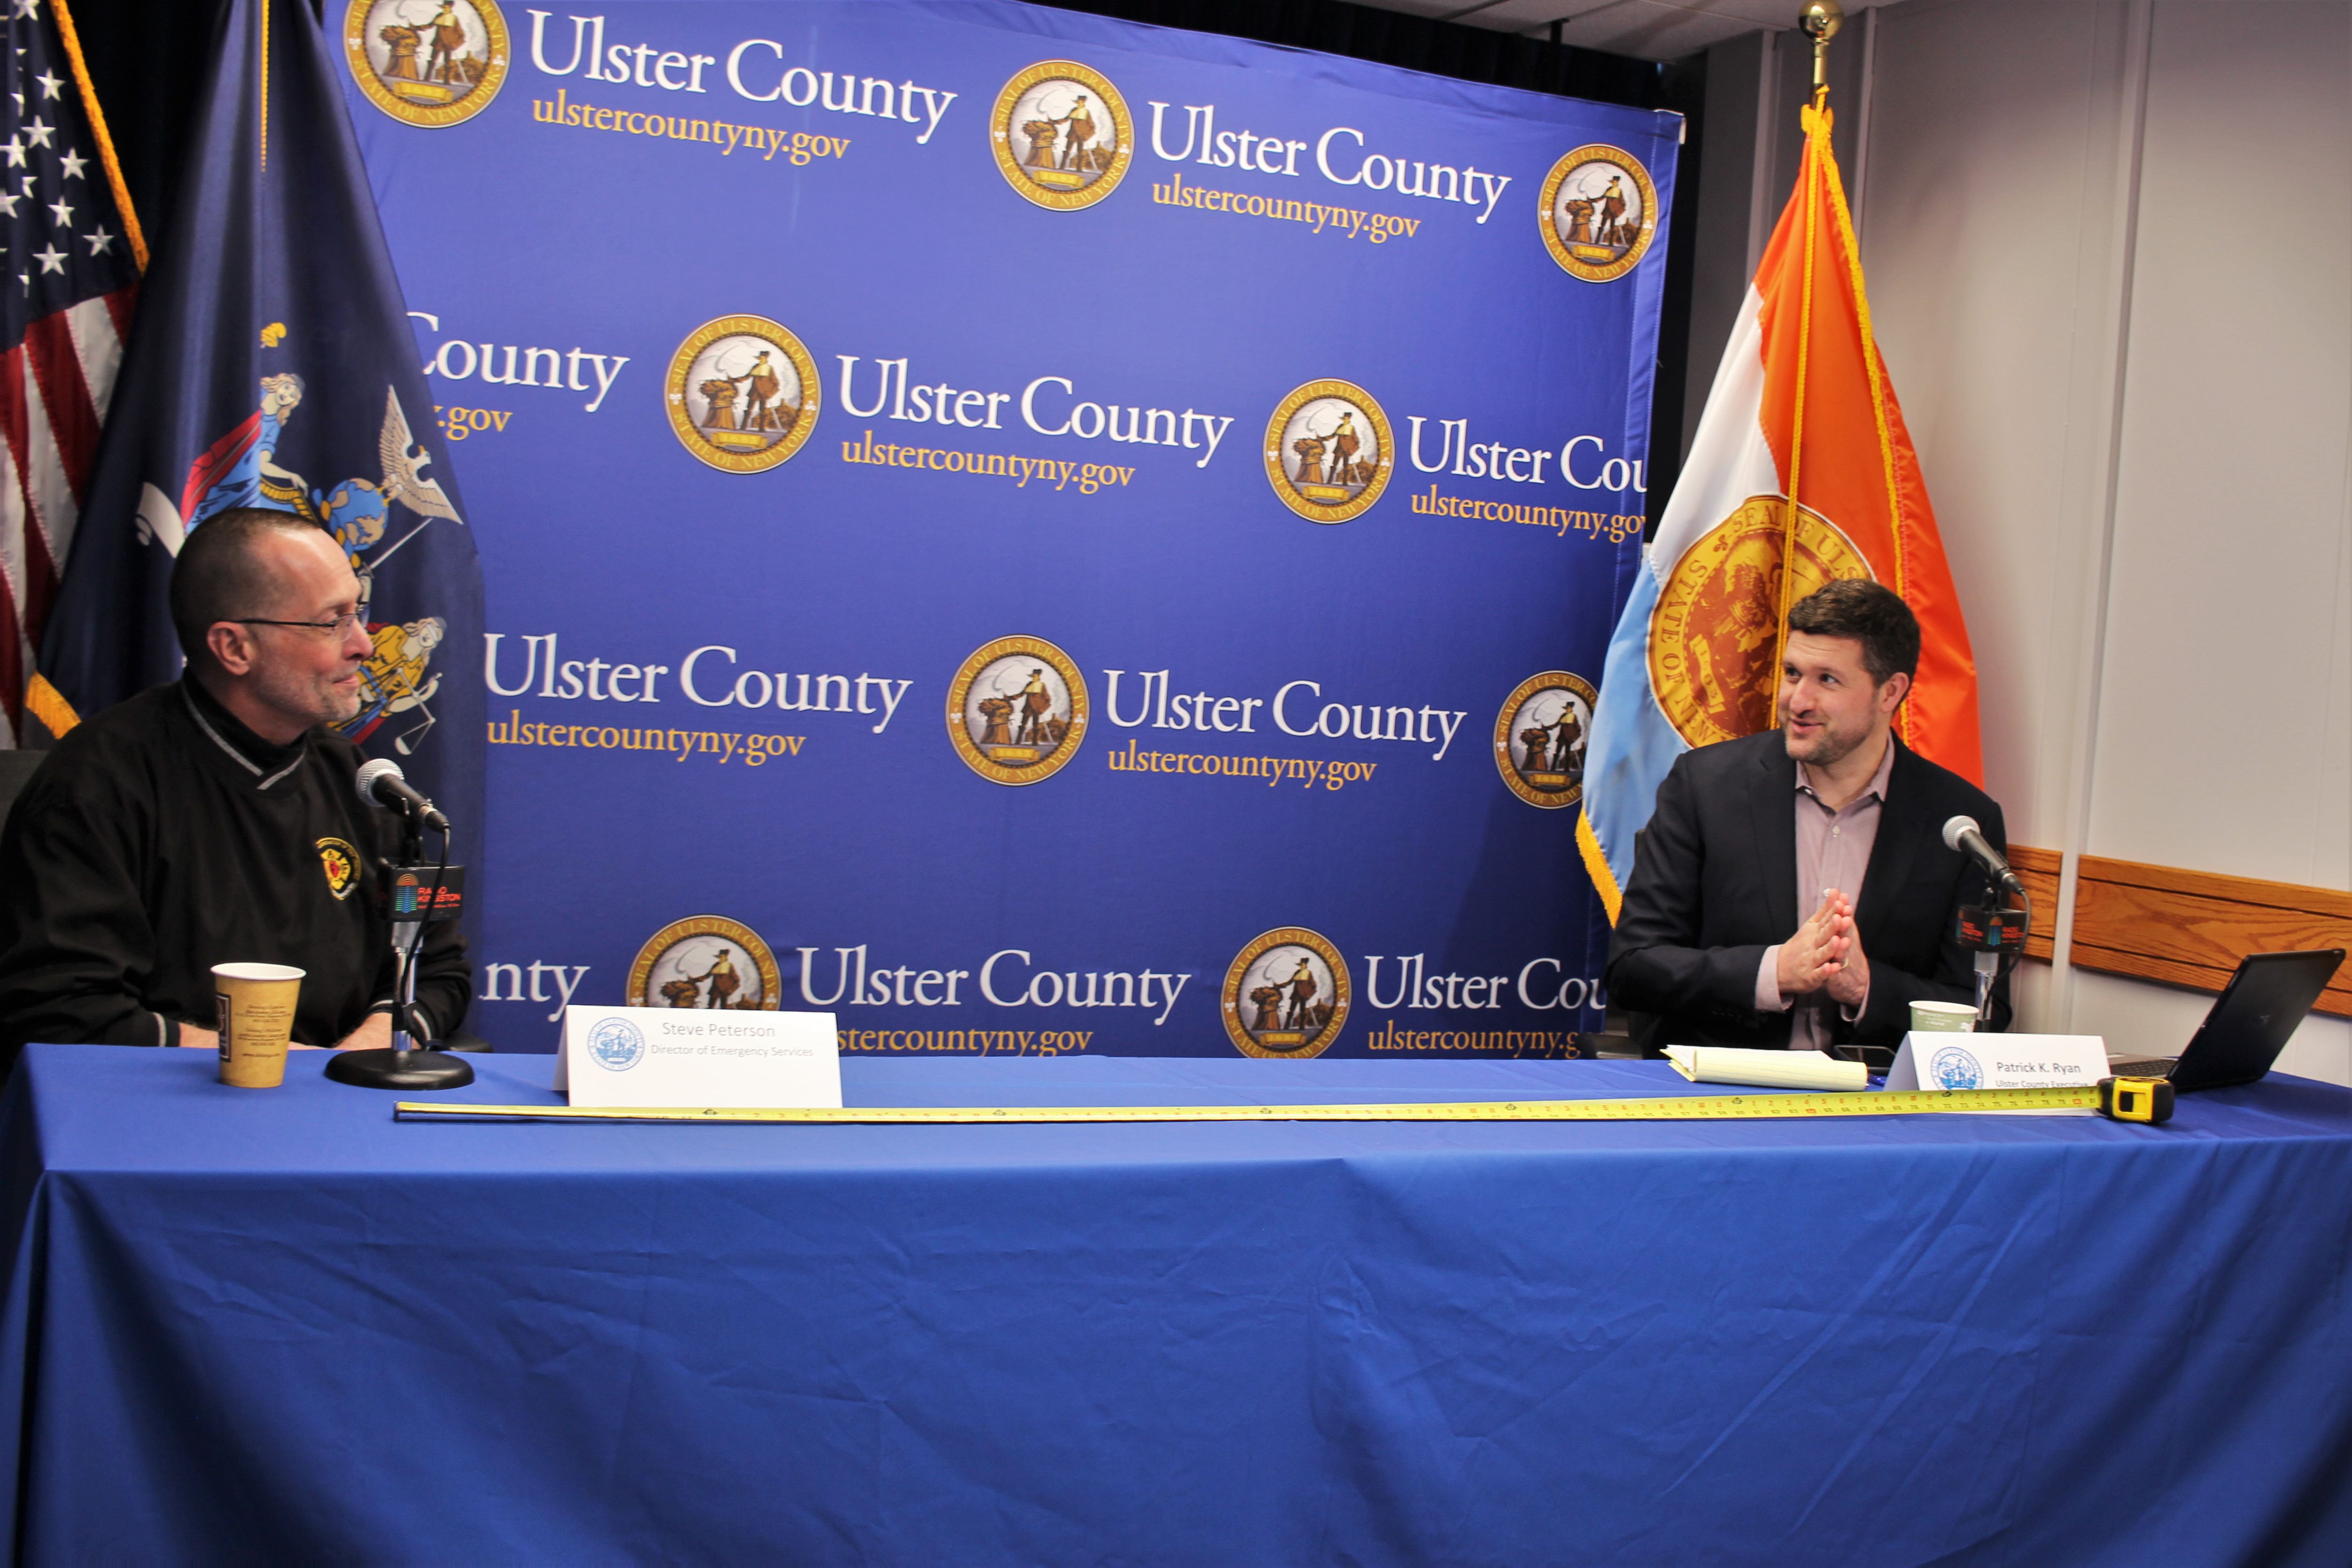 Ulster County Executive Ryan Holds Seventh Live Facebook Town Hall on